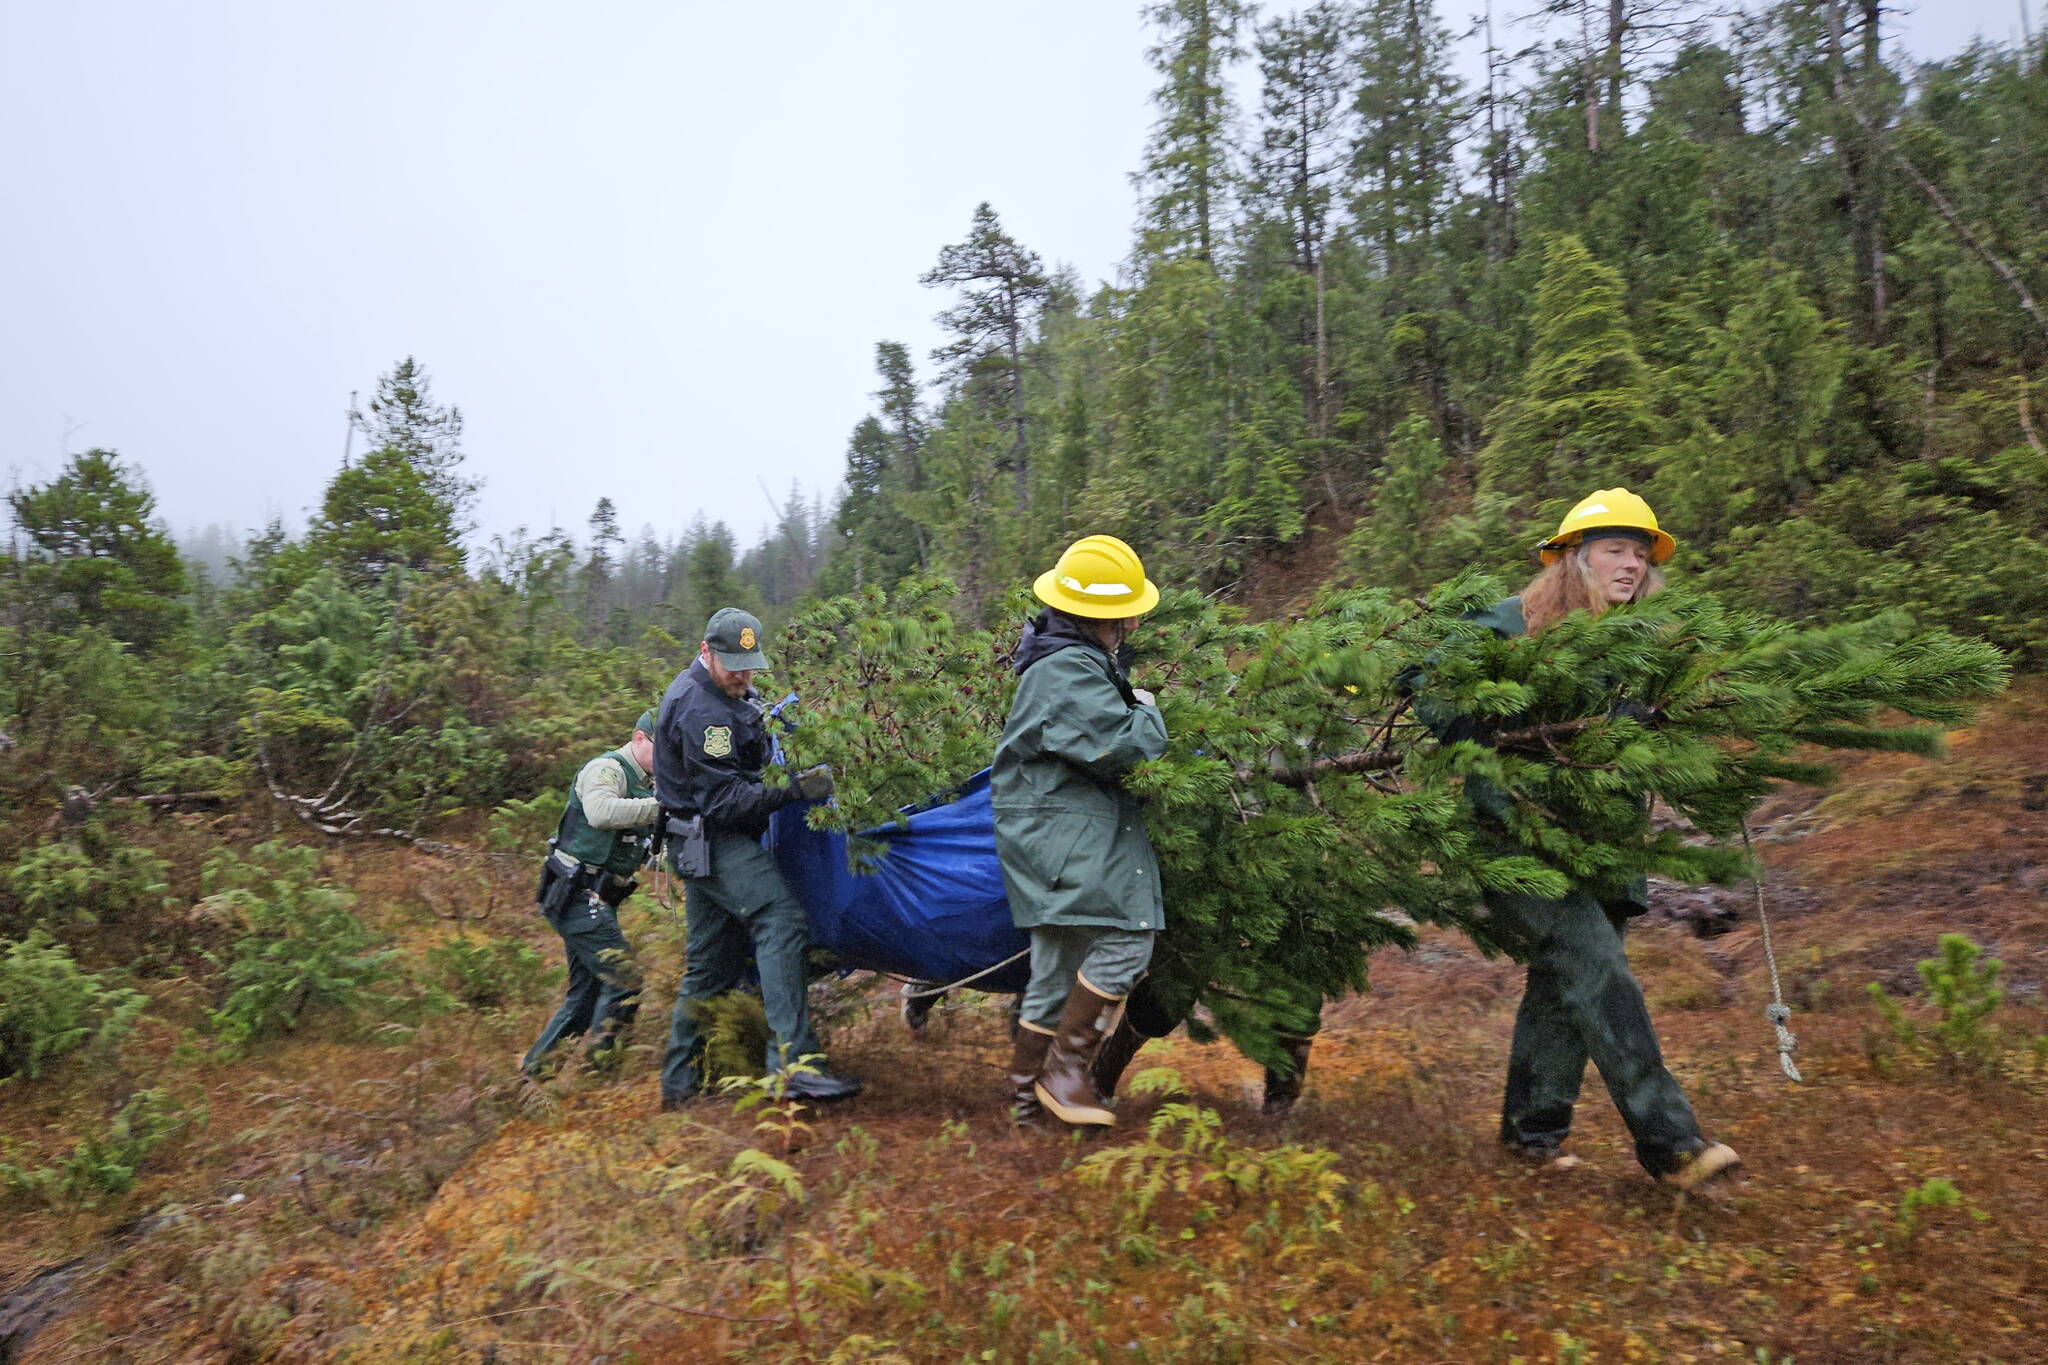 Staff of the Ketchikan Misty Fjords Ranger District carry a 15-foot-long lodgepole pine near the Silvis Lake area to a vessel for transport to Juneau on Nov. 30. (Photo courtesy of the U.S. Forest Service)